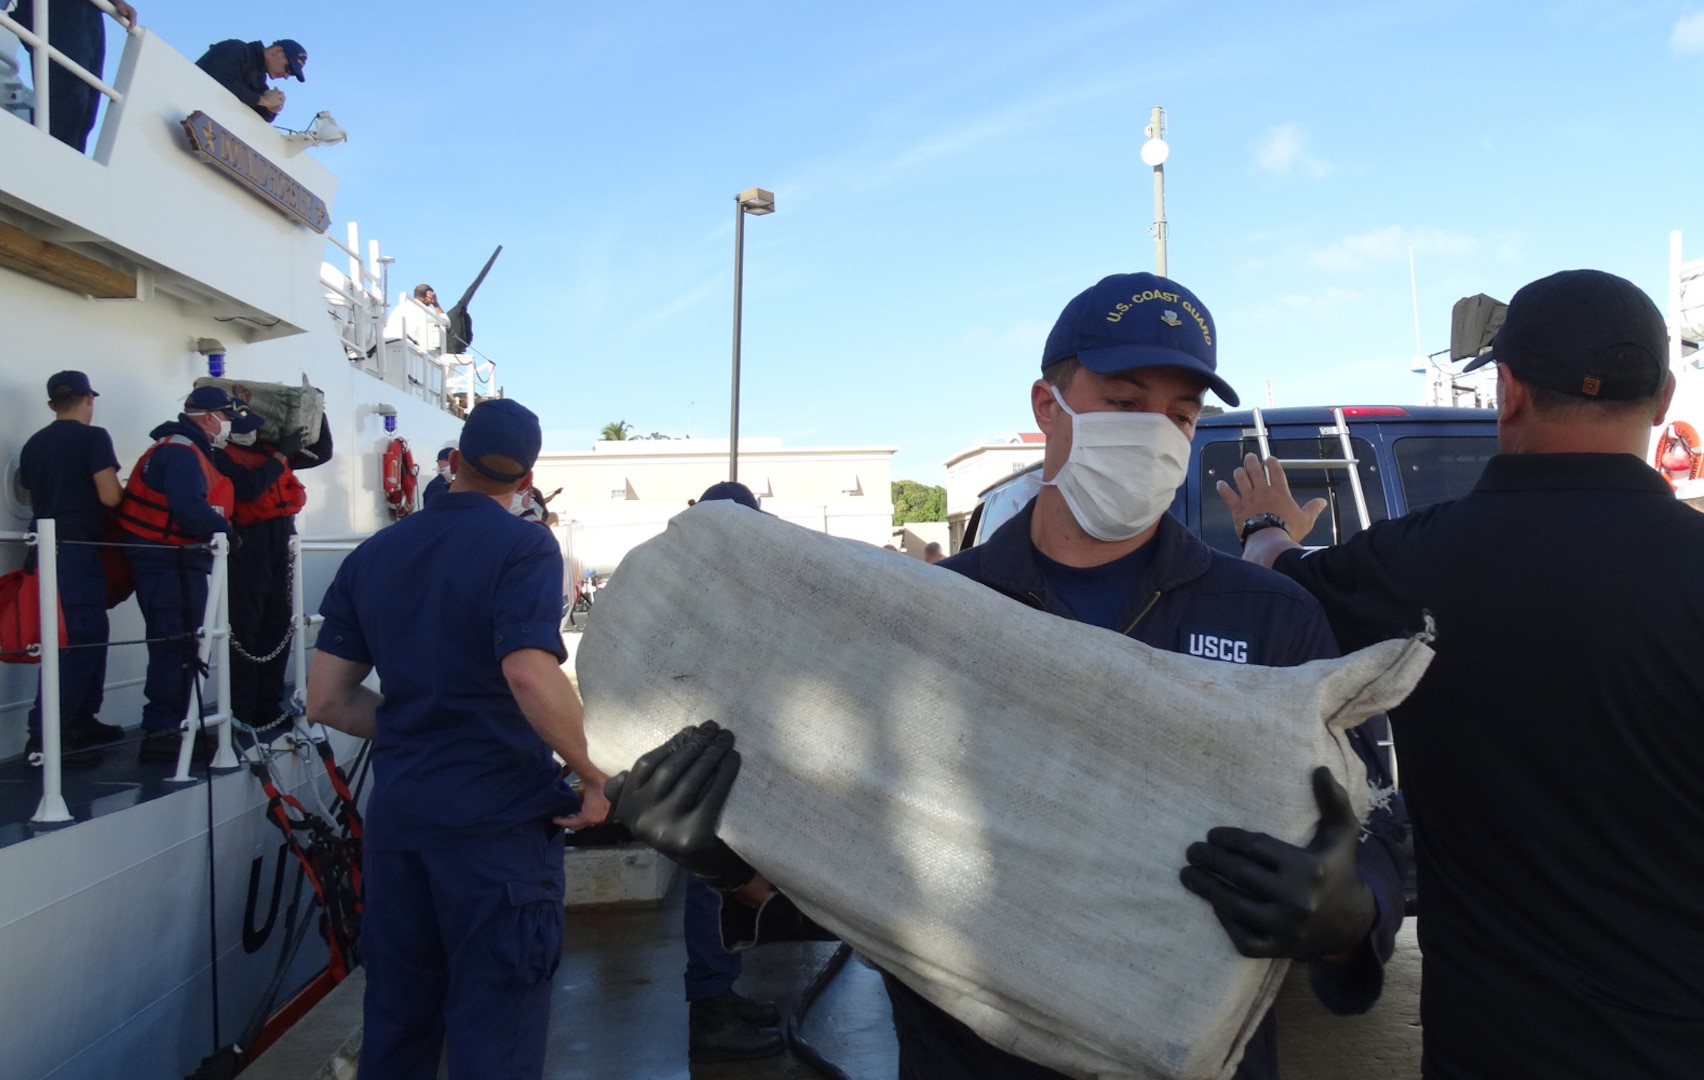 The Coast Guard transferred custody of four suspected smugglers and multiple bales of cocaine to U.S. federal law enforcement authorities at Coast Guard Sector San Juan, Puerto Rico Jan. 8, 2017. In total, 2,000 pounds of cocaine with an estimated wholesale value of $30 million were seized as a result of multi-agency law enforcement efforts in support of Operation Unified Resolve and Operation Caribbean Guard. (U.S. Coast Guard photo)